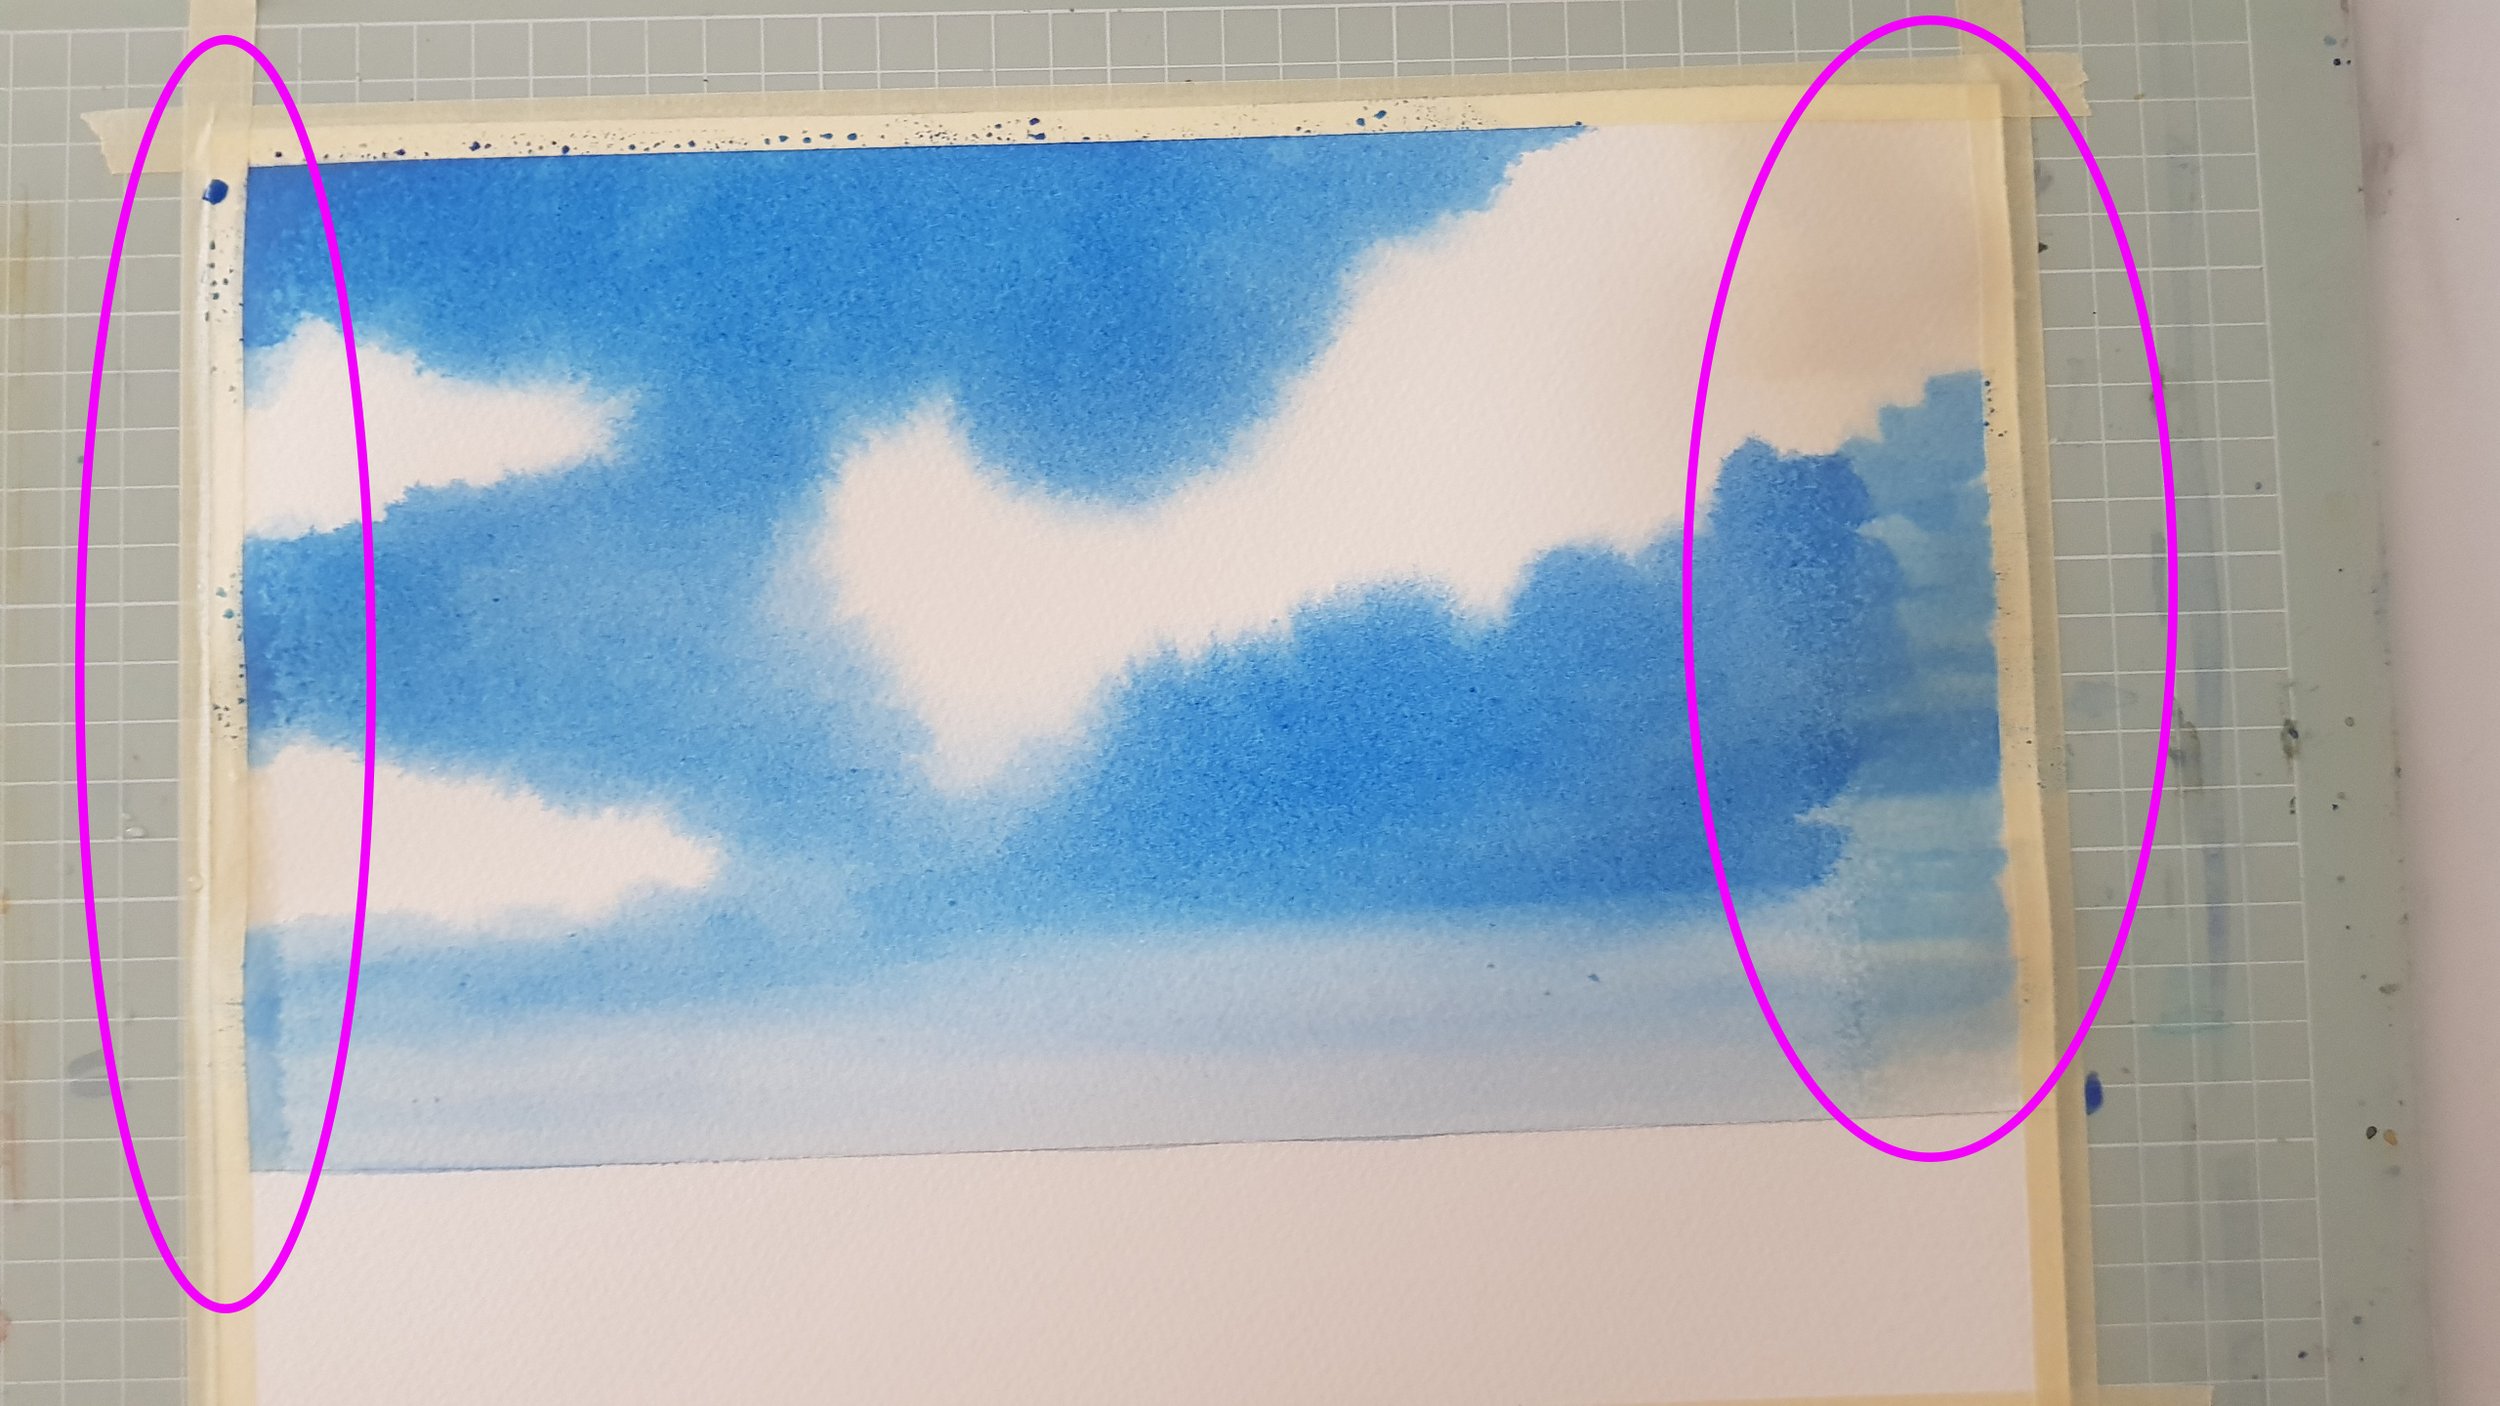 Watercolor Paper Gone Bad - How Does Bad Paper Look Like and How